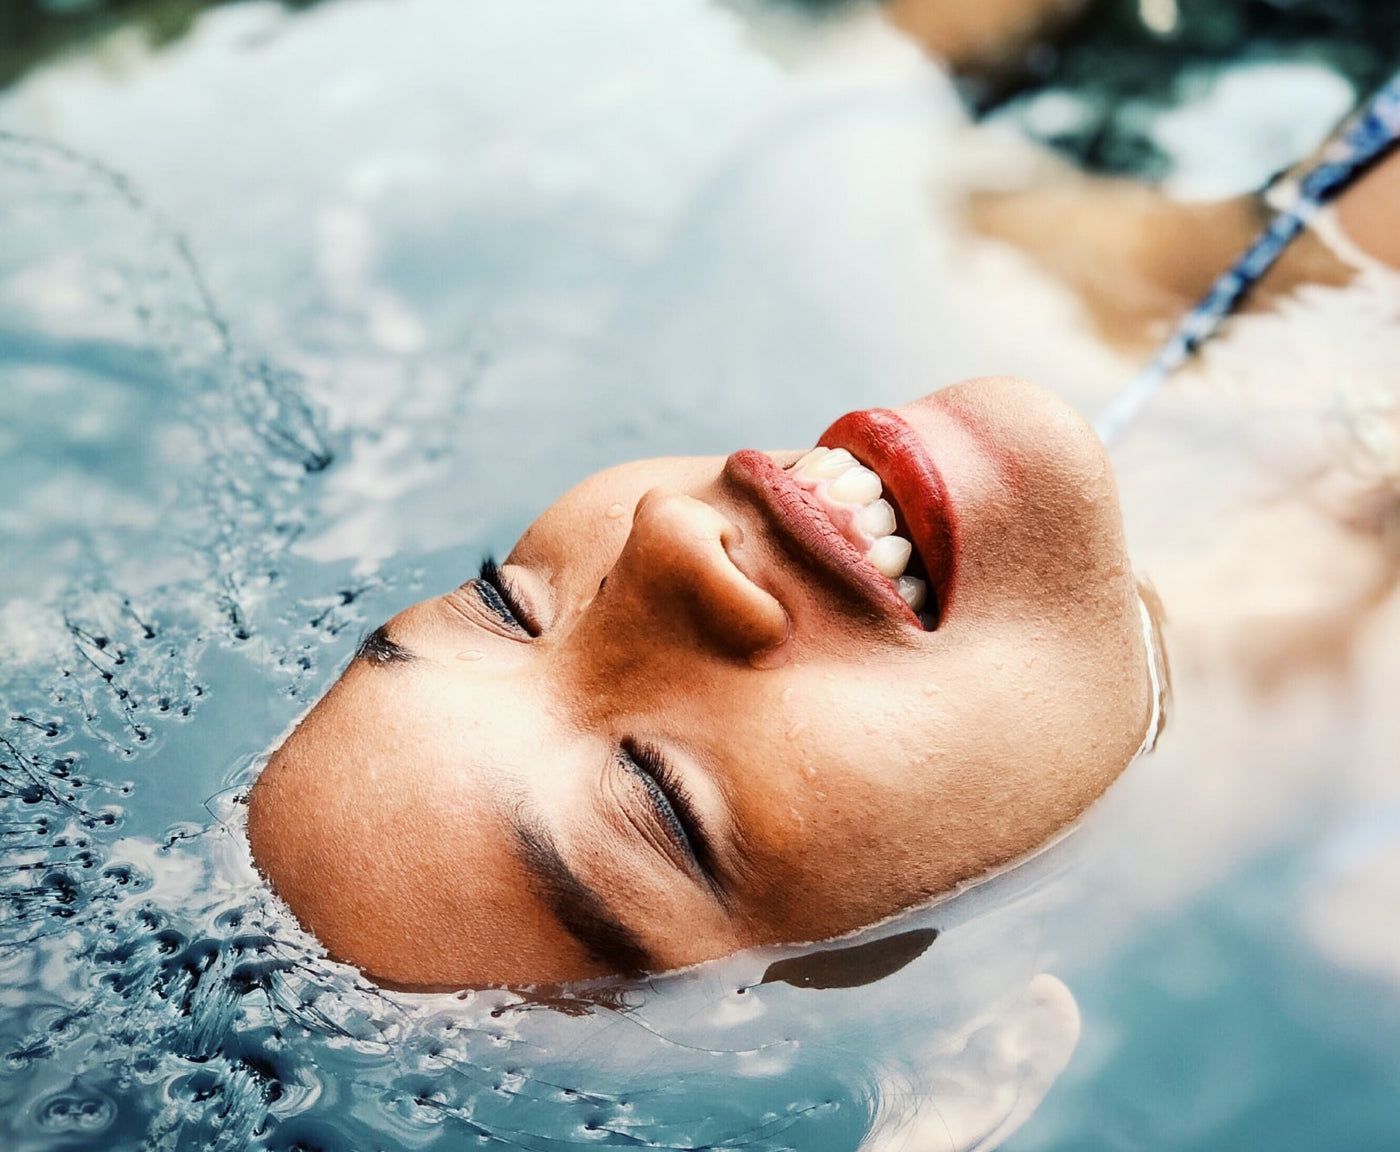 10 Ways to Keep Your Skin Hydrated